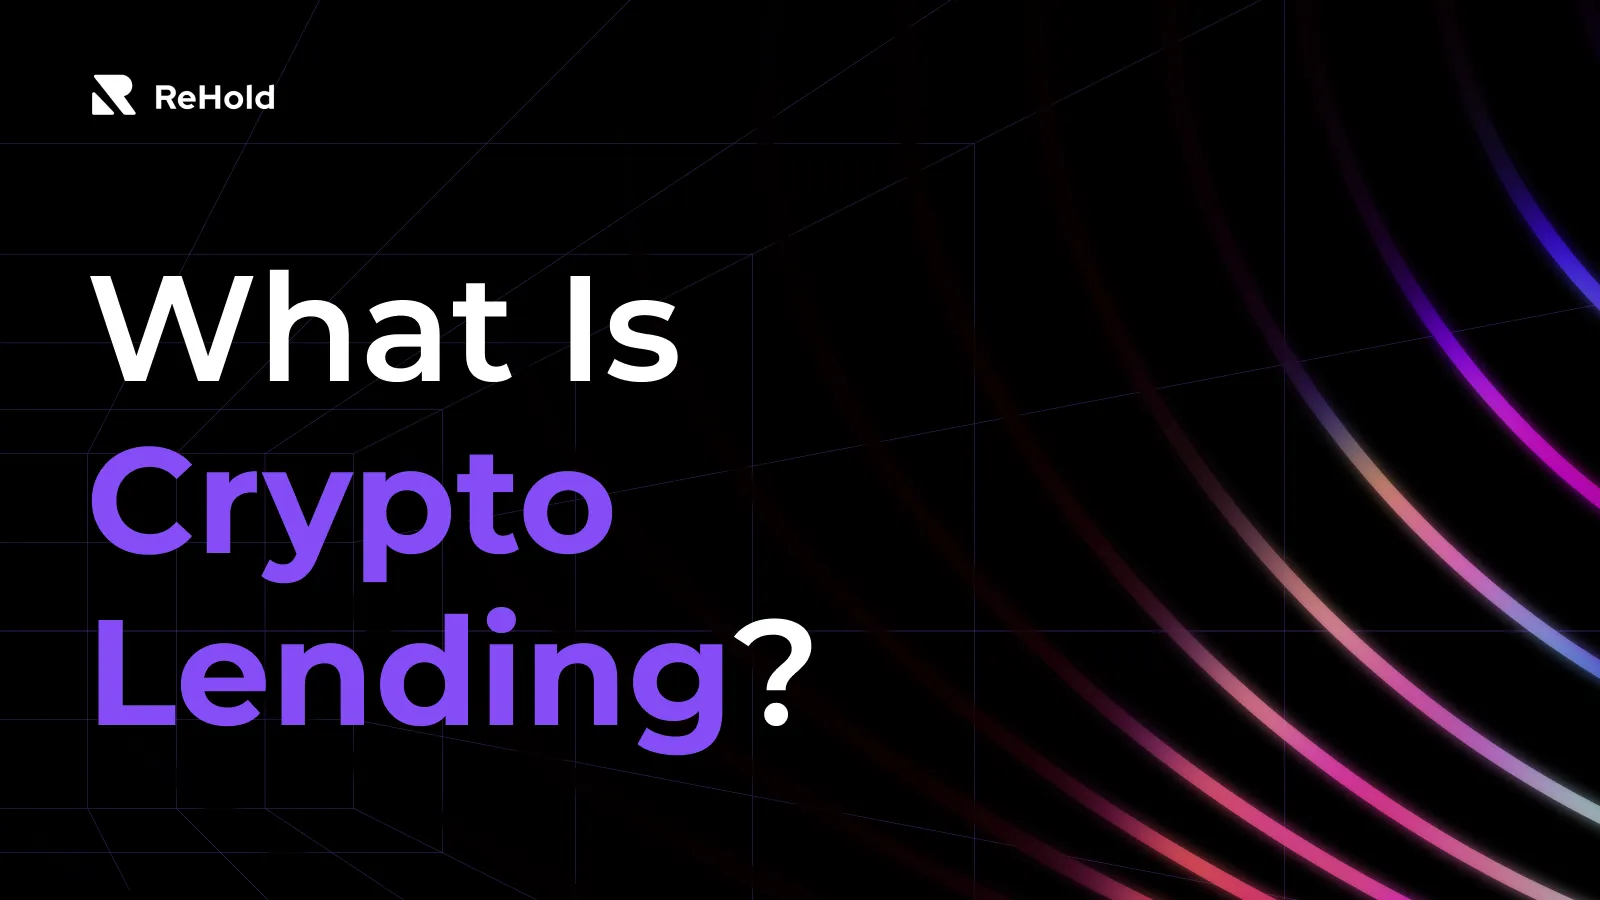 What Is Crypto Lending?